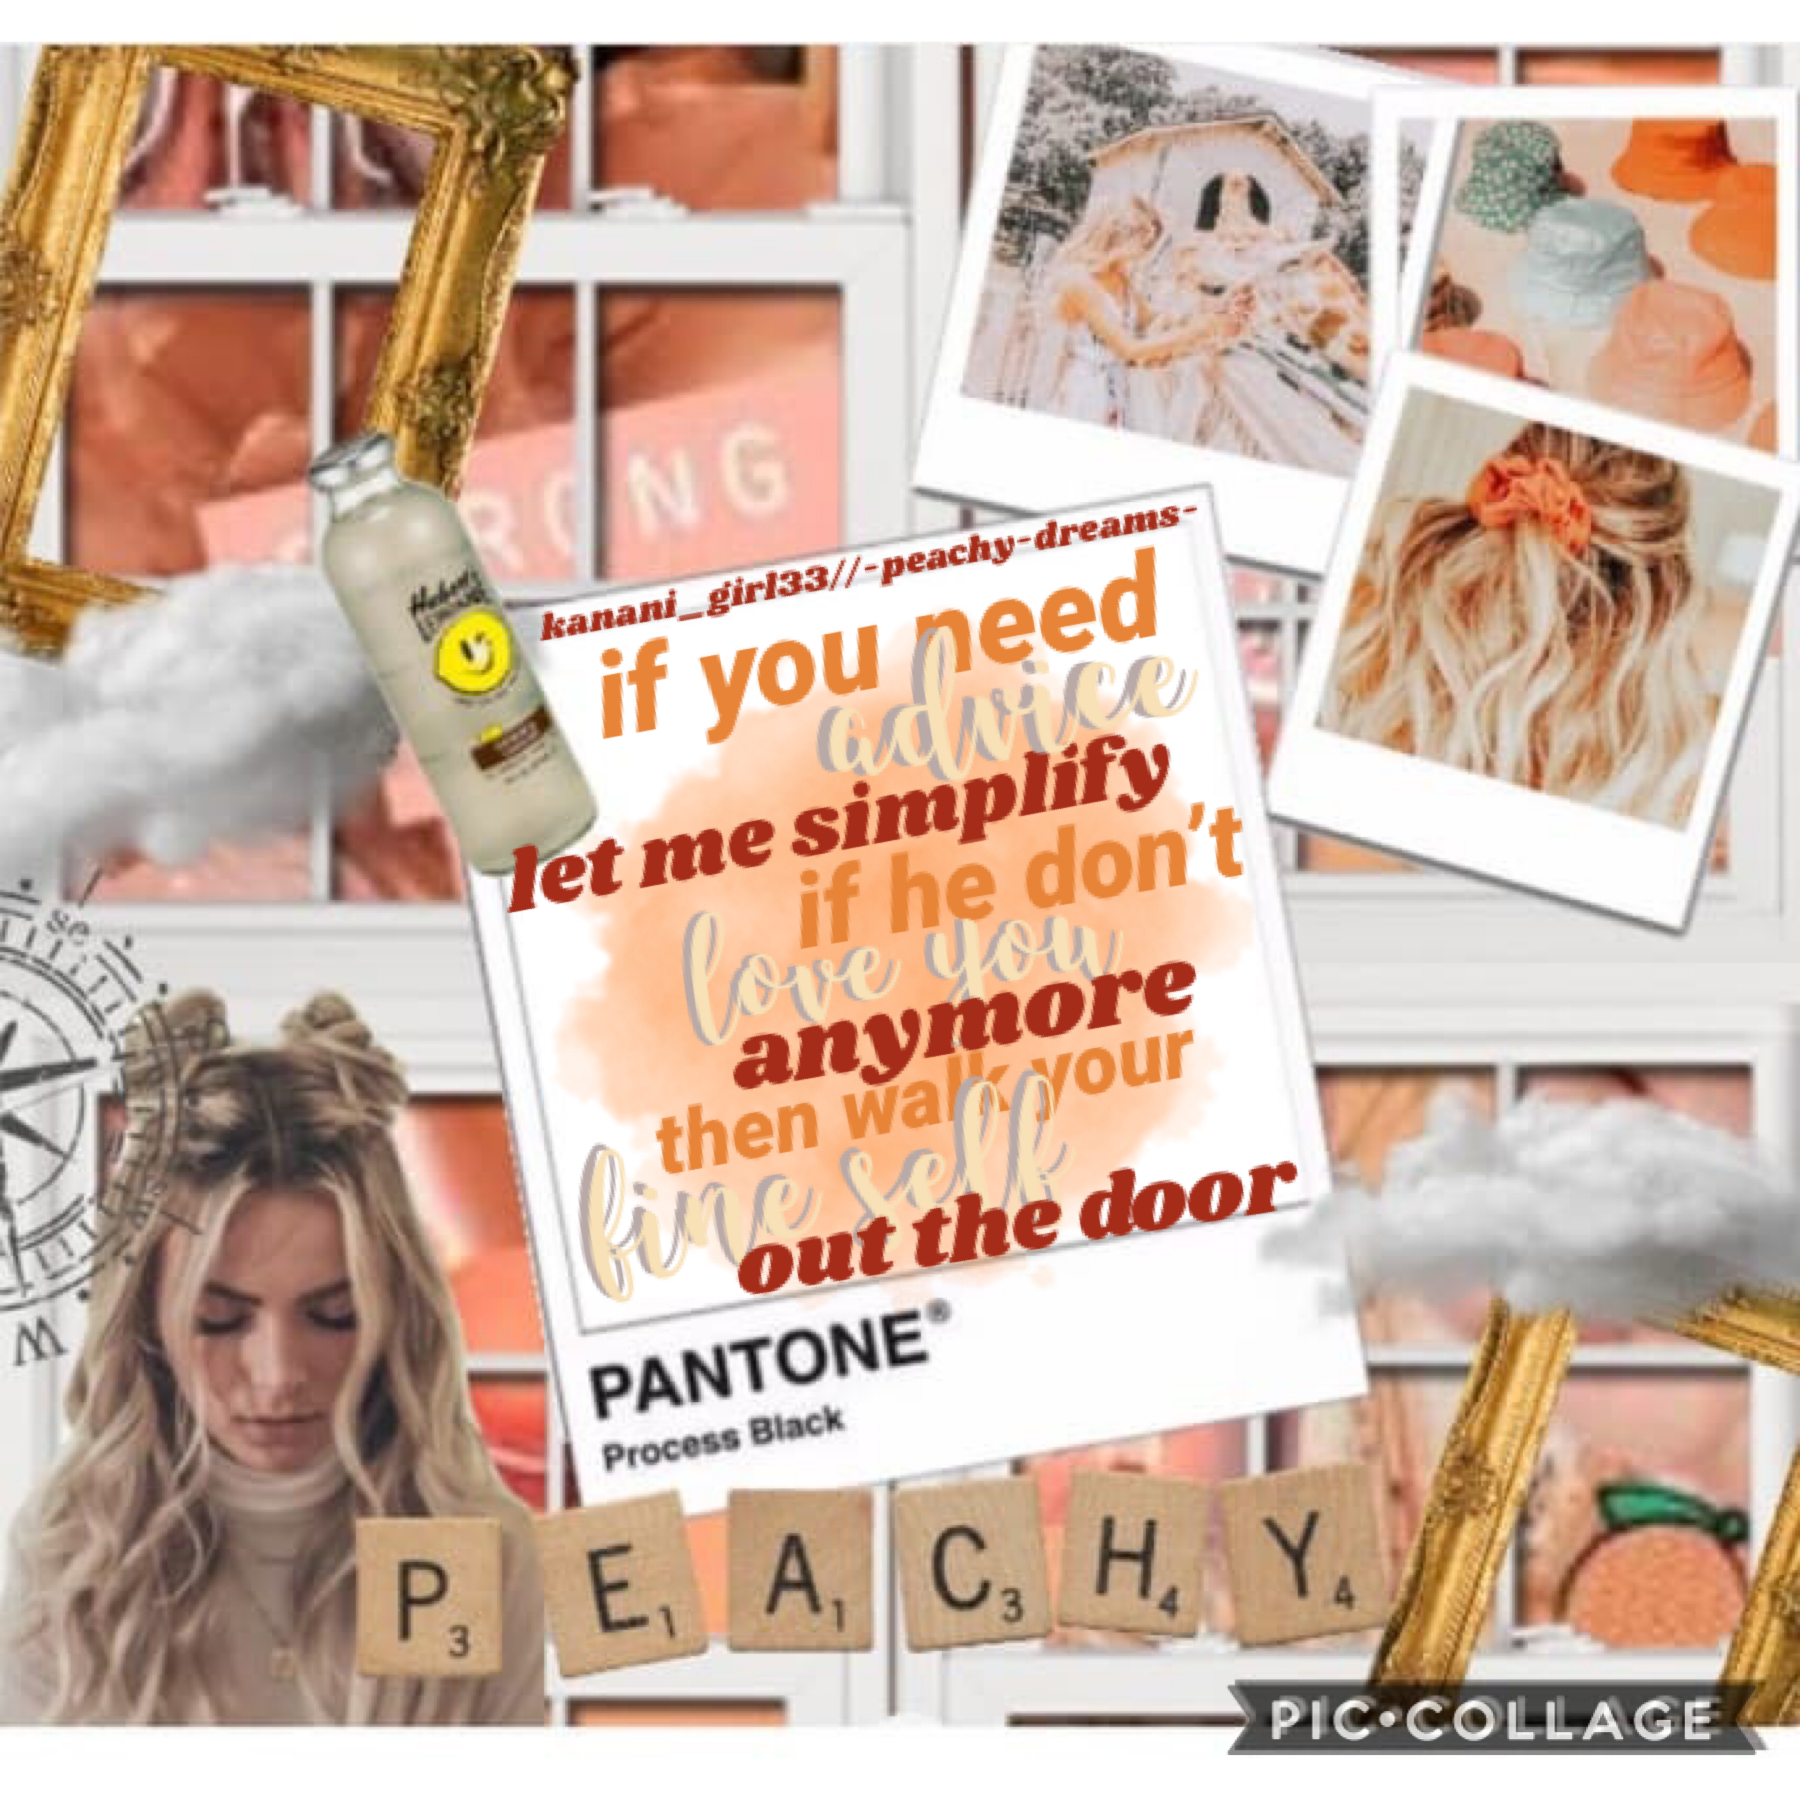 ✨tap✨
collab with -peachy-dreams- 💗 she’s soo nice and did the gorgeous background. how is everyone? i hope you guys have the most amazing day! qotd: favorite skincare/cosmetic brand?? aotd: tarte, glow recipe, and belief 🤍